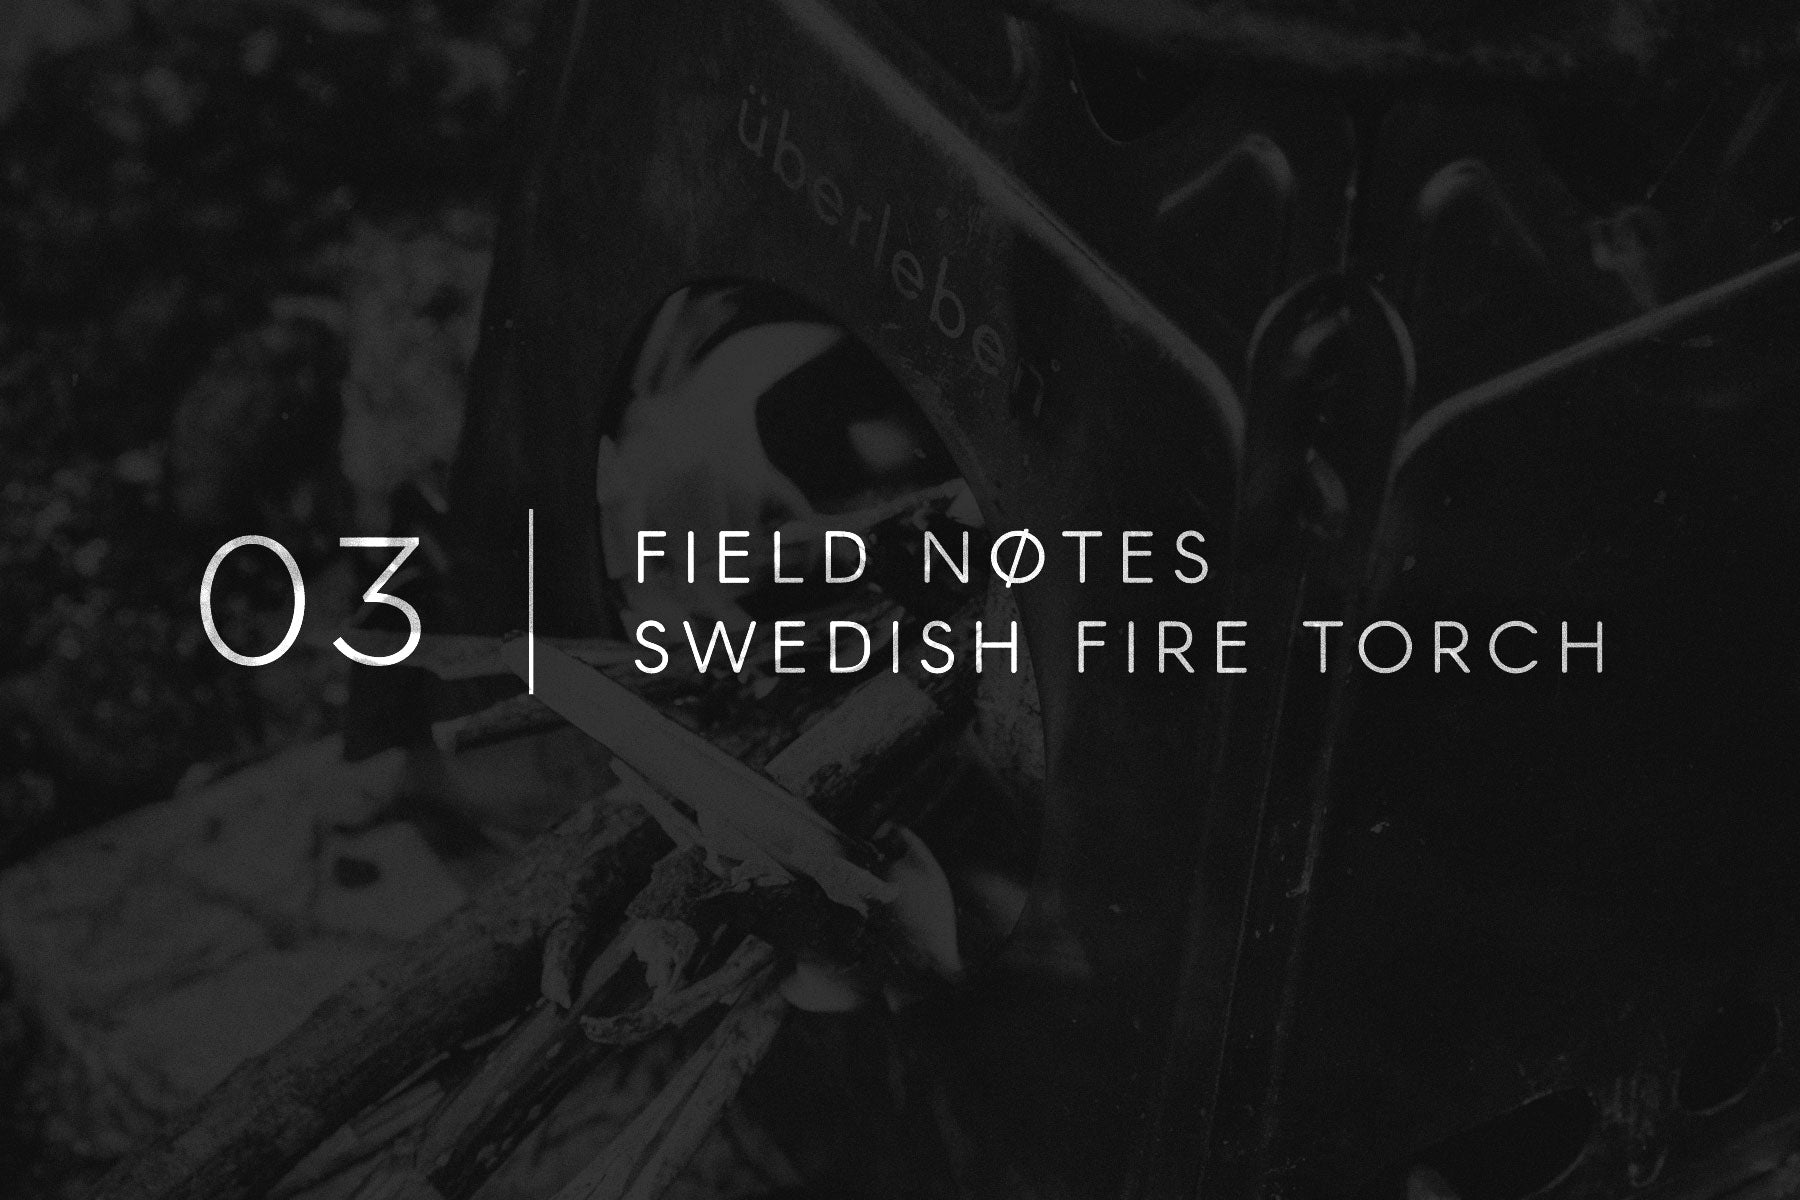 Field Notes 03 - Swedish Fire Torch